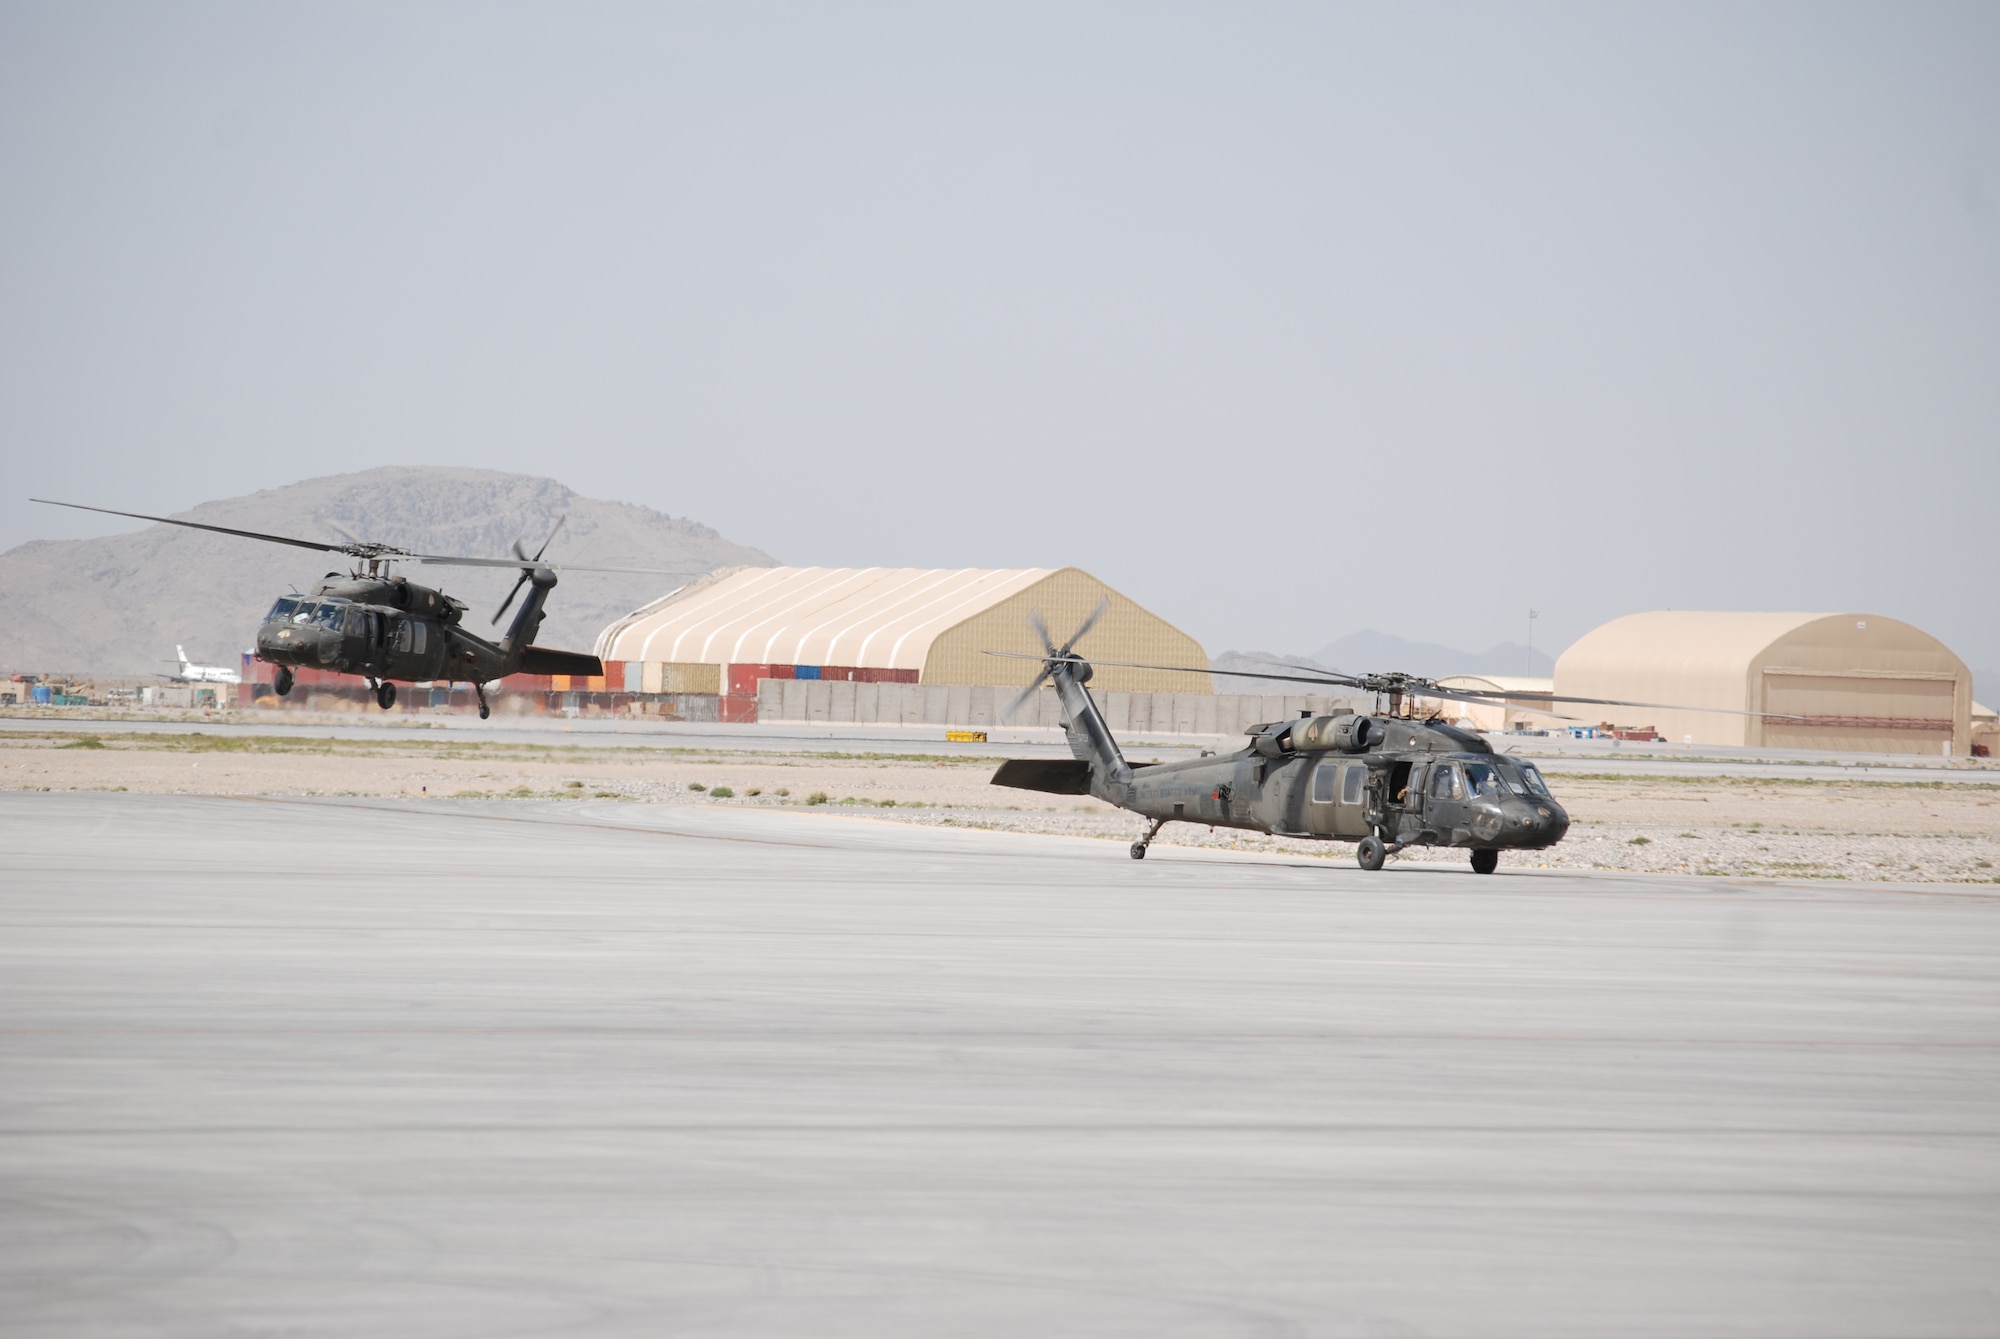 Two Army UH-60 Black Hawk helicopters arrive at Kandahar Airfield, March 20, 2014. The UH-60 is frequently used for troop movements within an area of operations. (U.S. Air Force photo by Capt. Brian Wagner/Released)